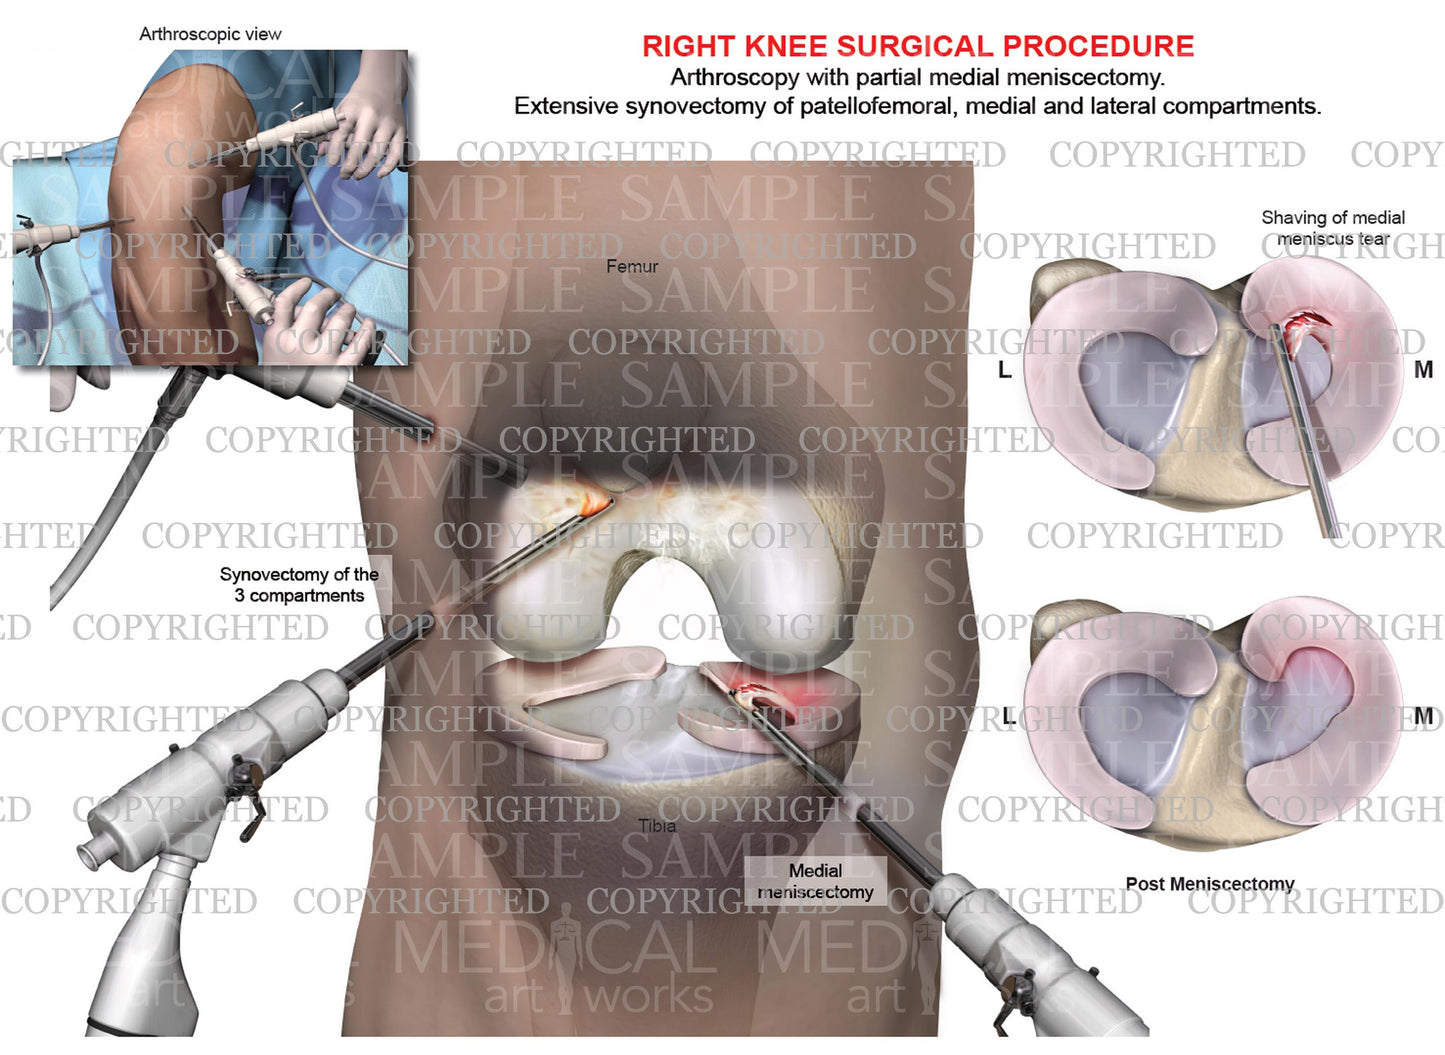 Arthroscopy of right knee with partial medial meniscectomy - tricompartmental synovectomy